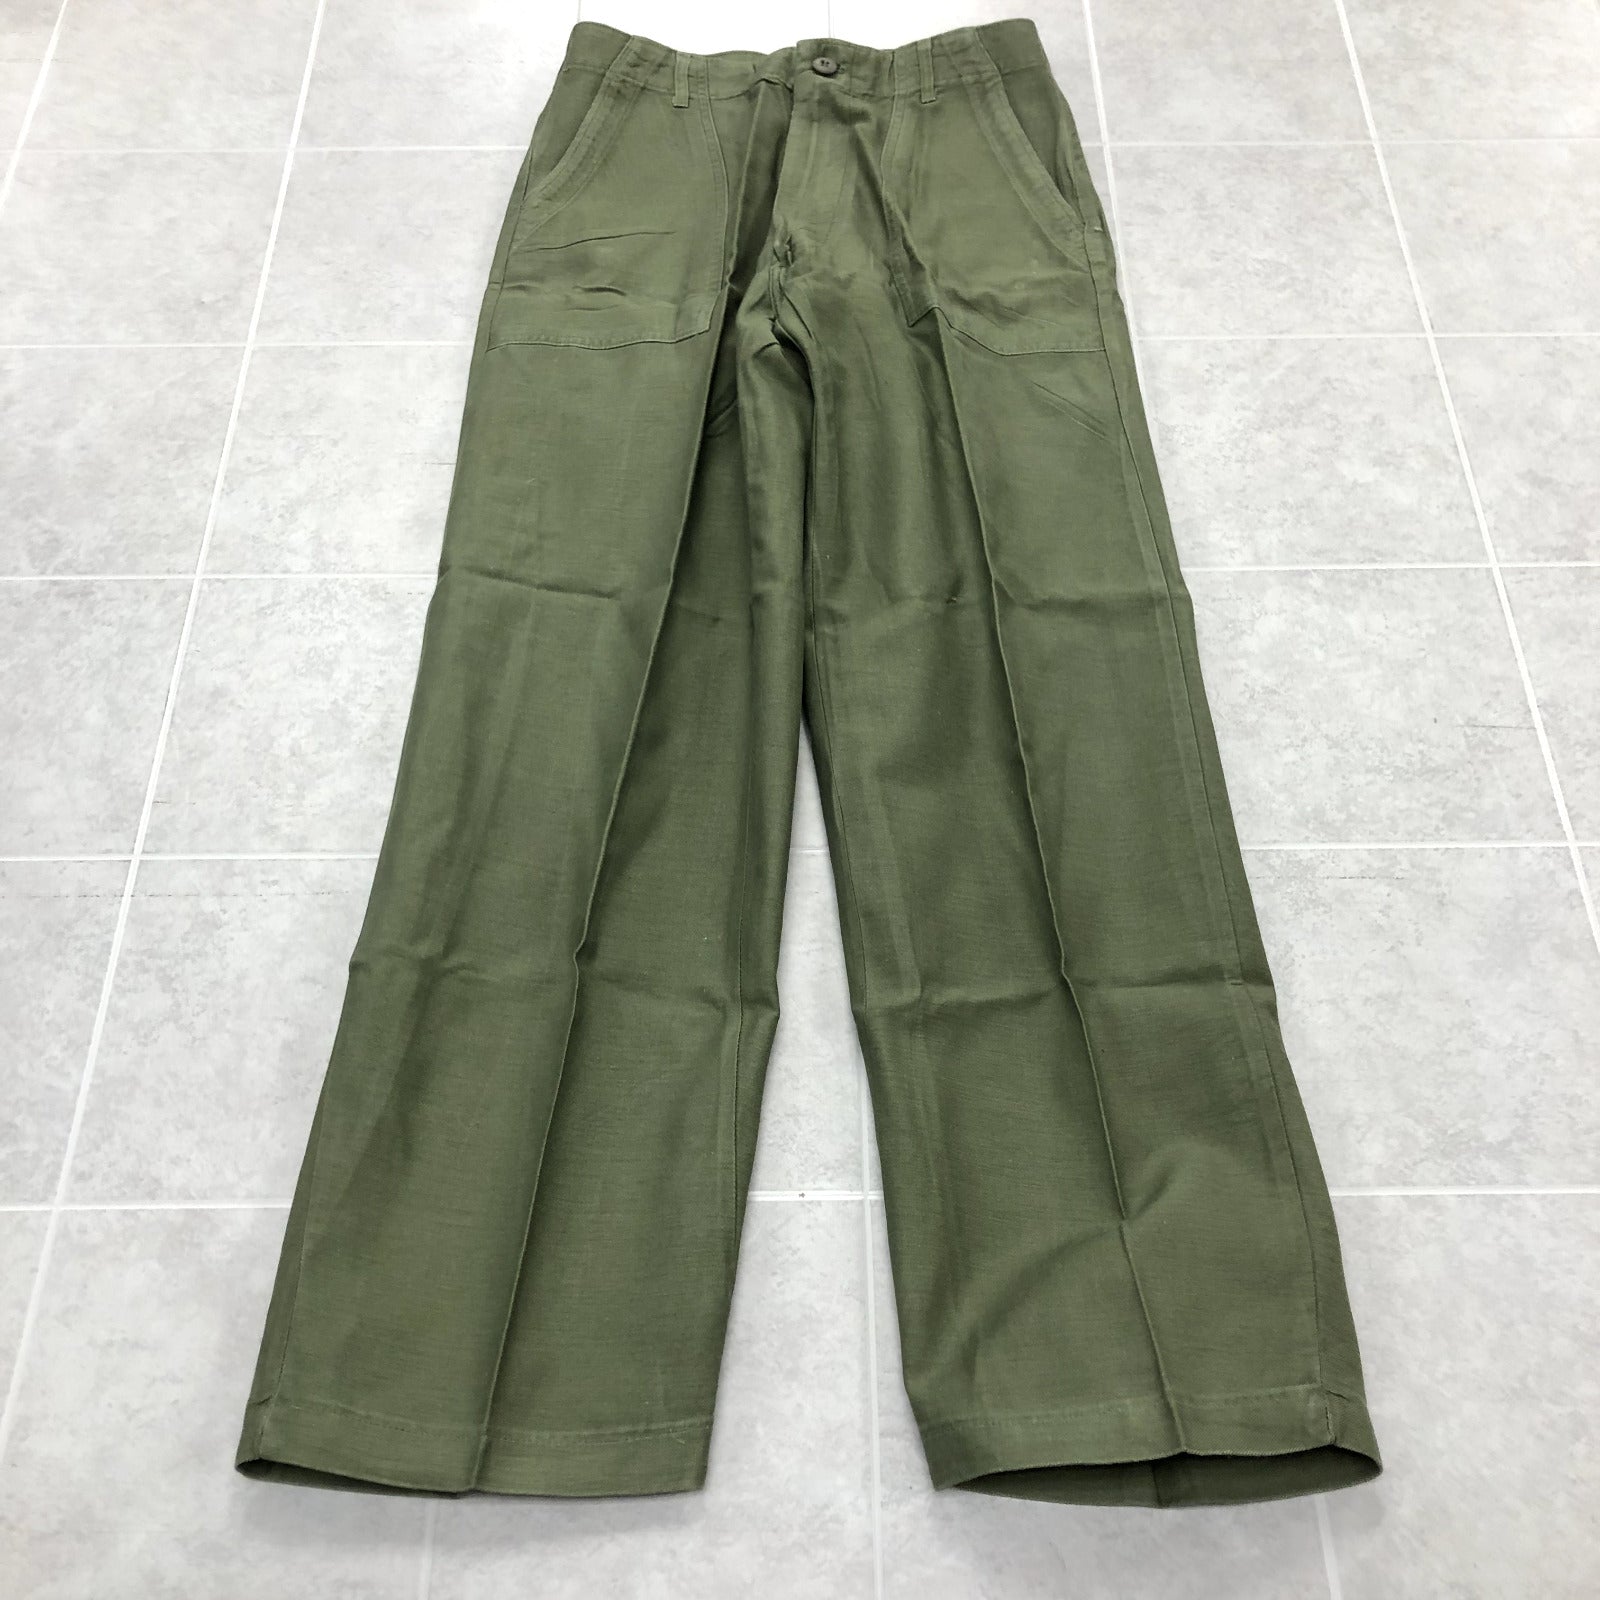 Vintage US Military Green Straight legged High-Rise Pants Adult Size 28 x 30